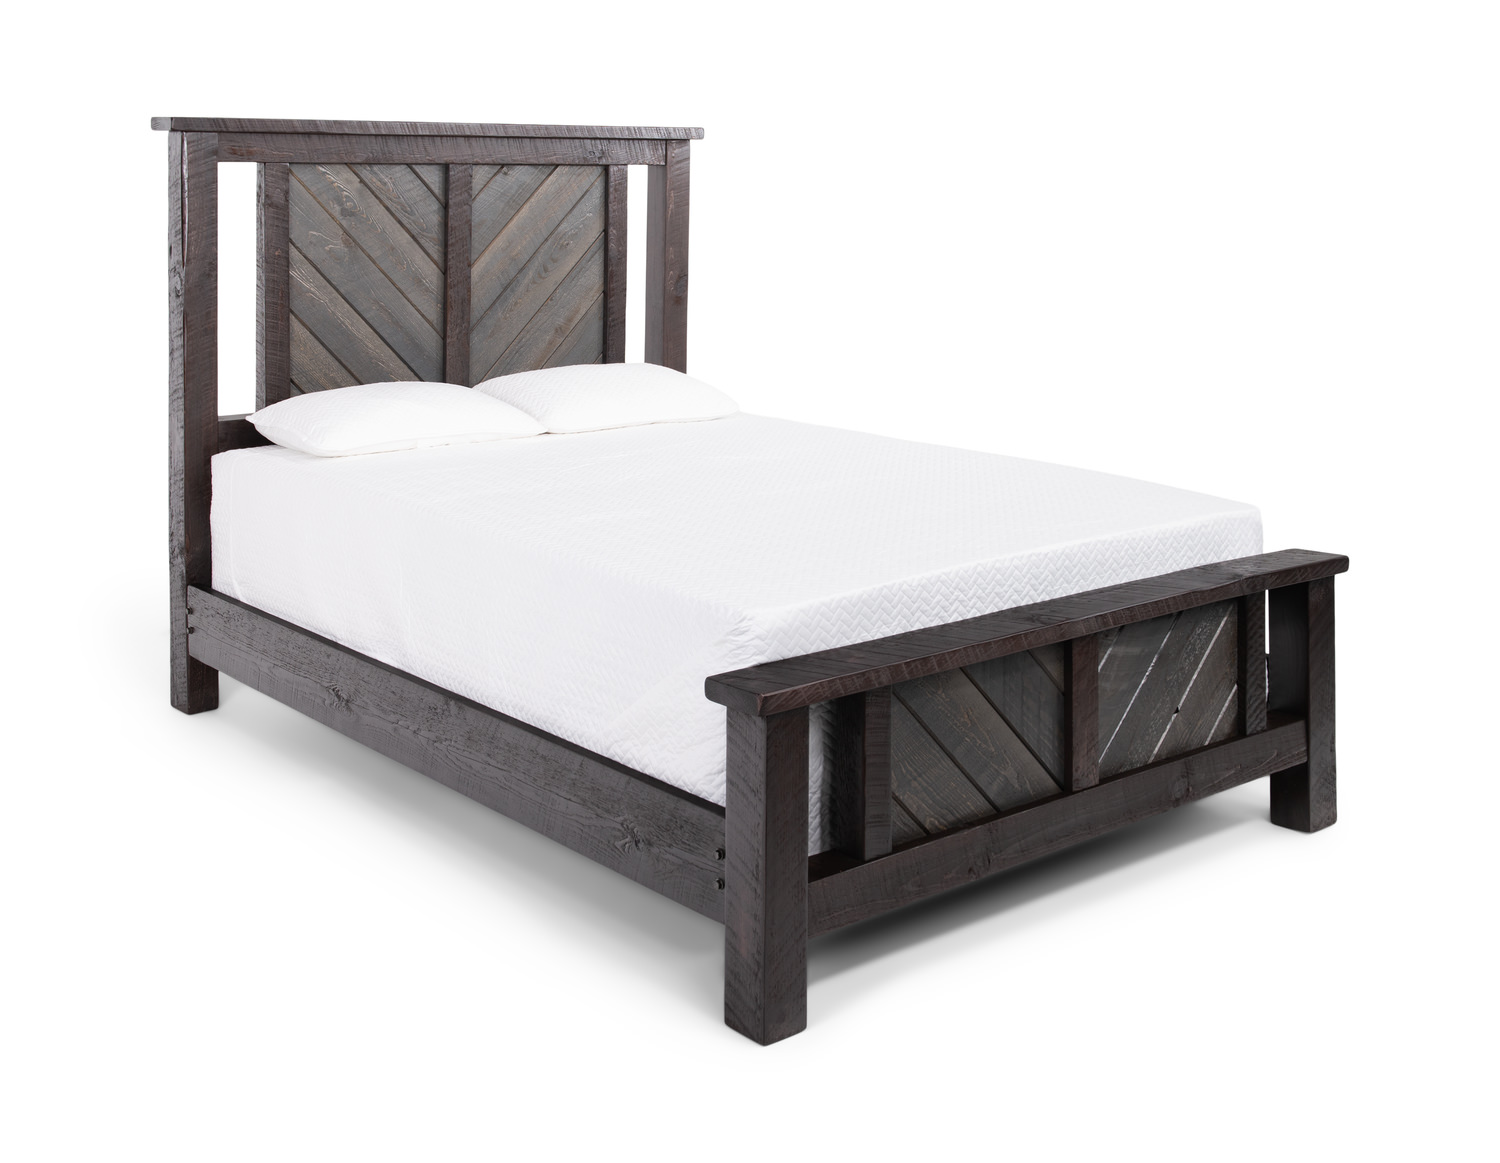 Woodshop Carriage Queen Bed